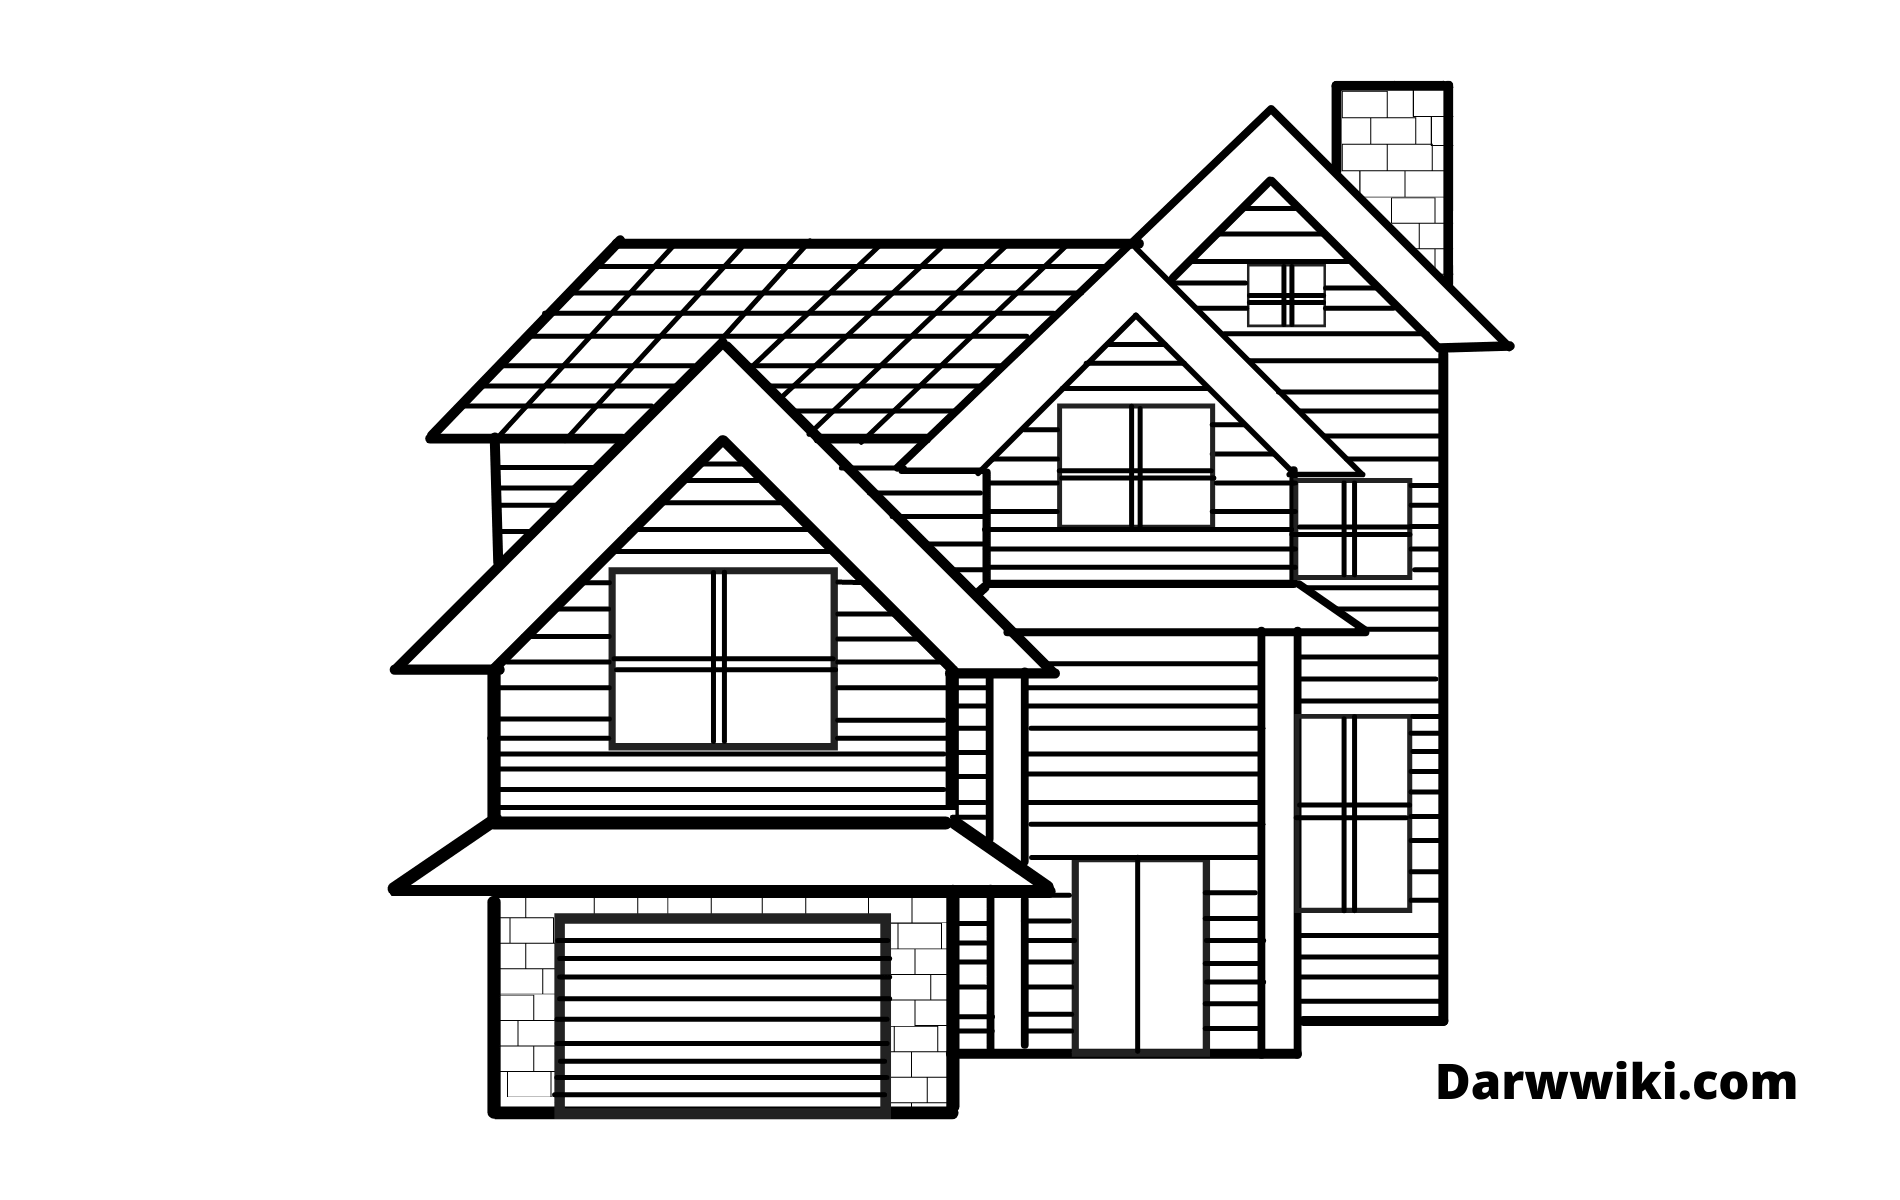 How To Draw House Step 10 - Draw All Rest of Line